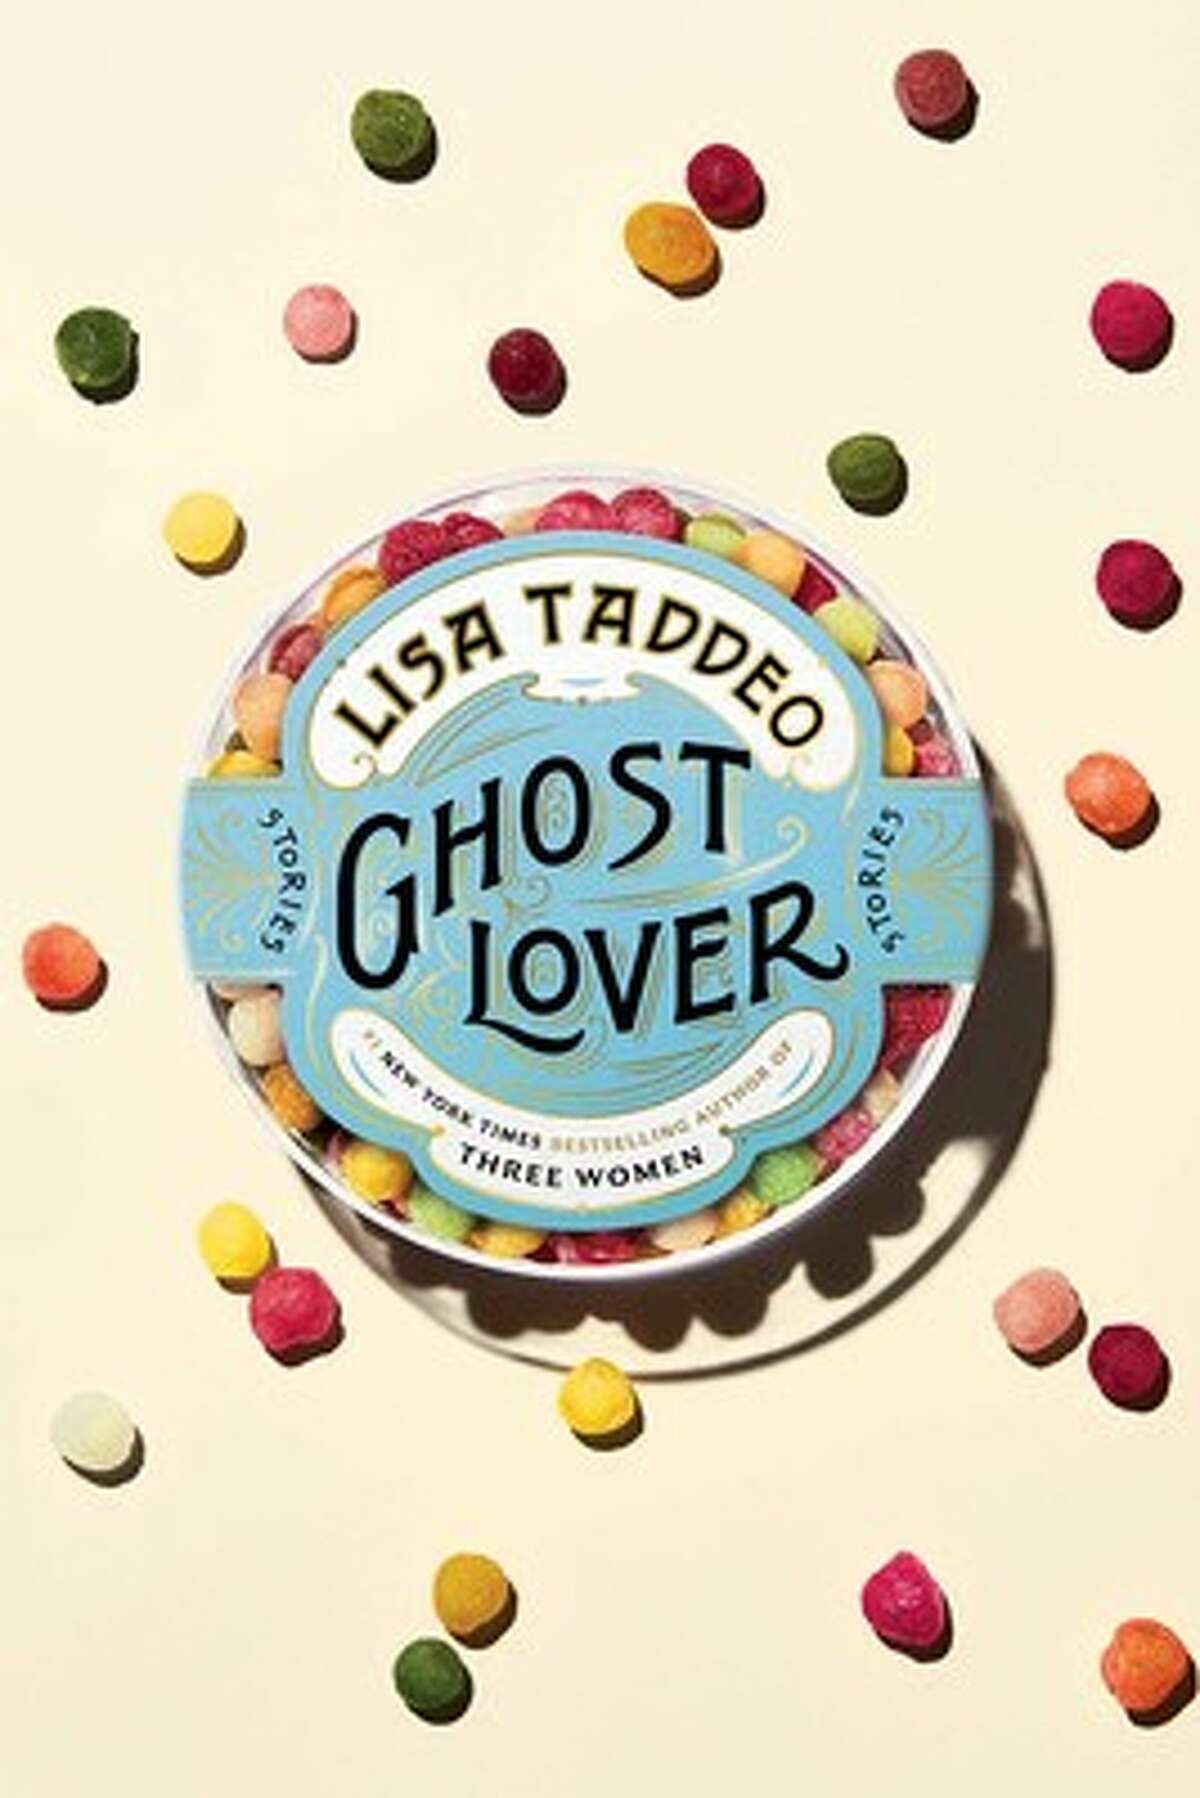 "ghost lover" by Lisa Taddeo of Washington. 